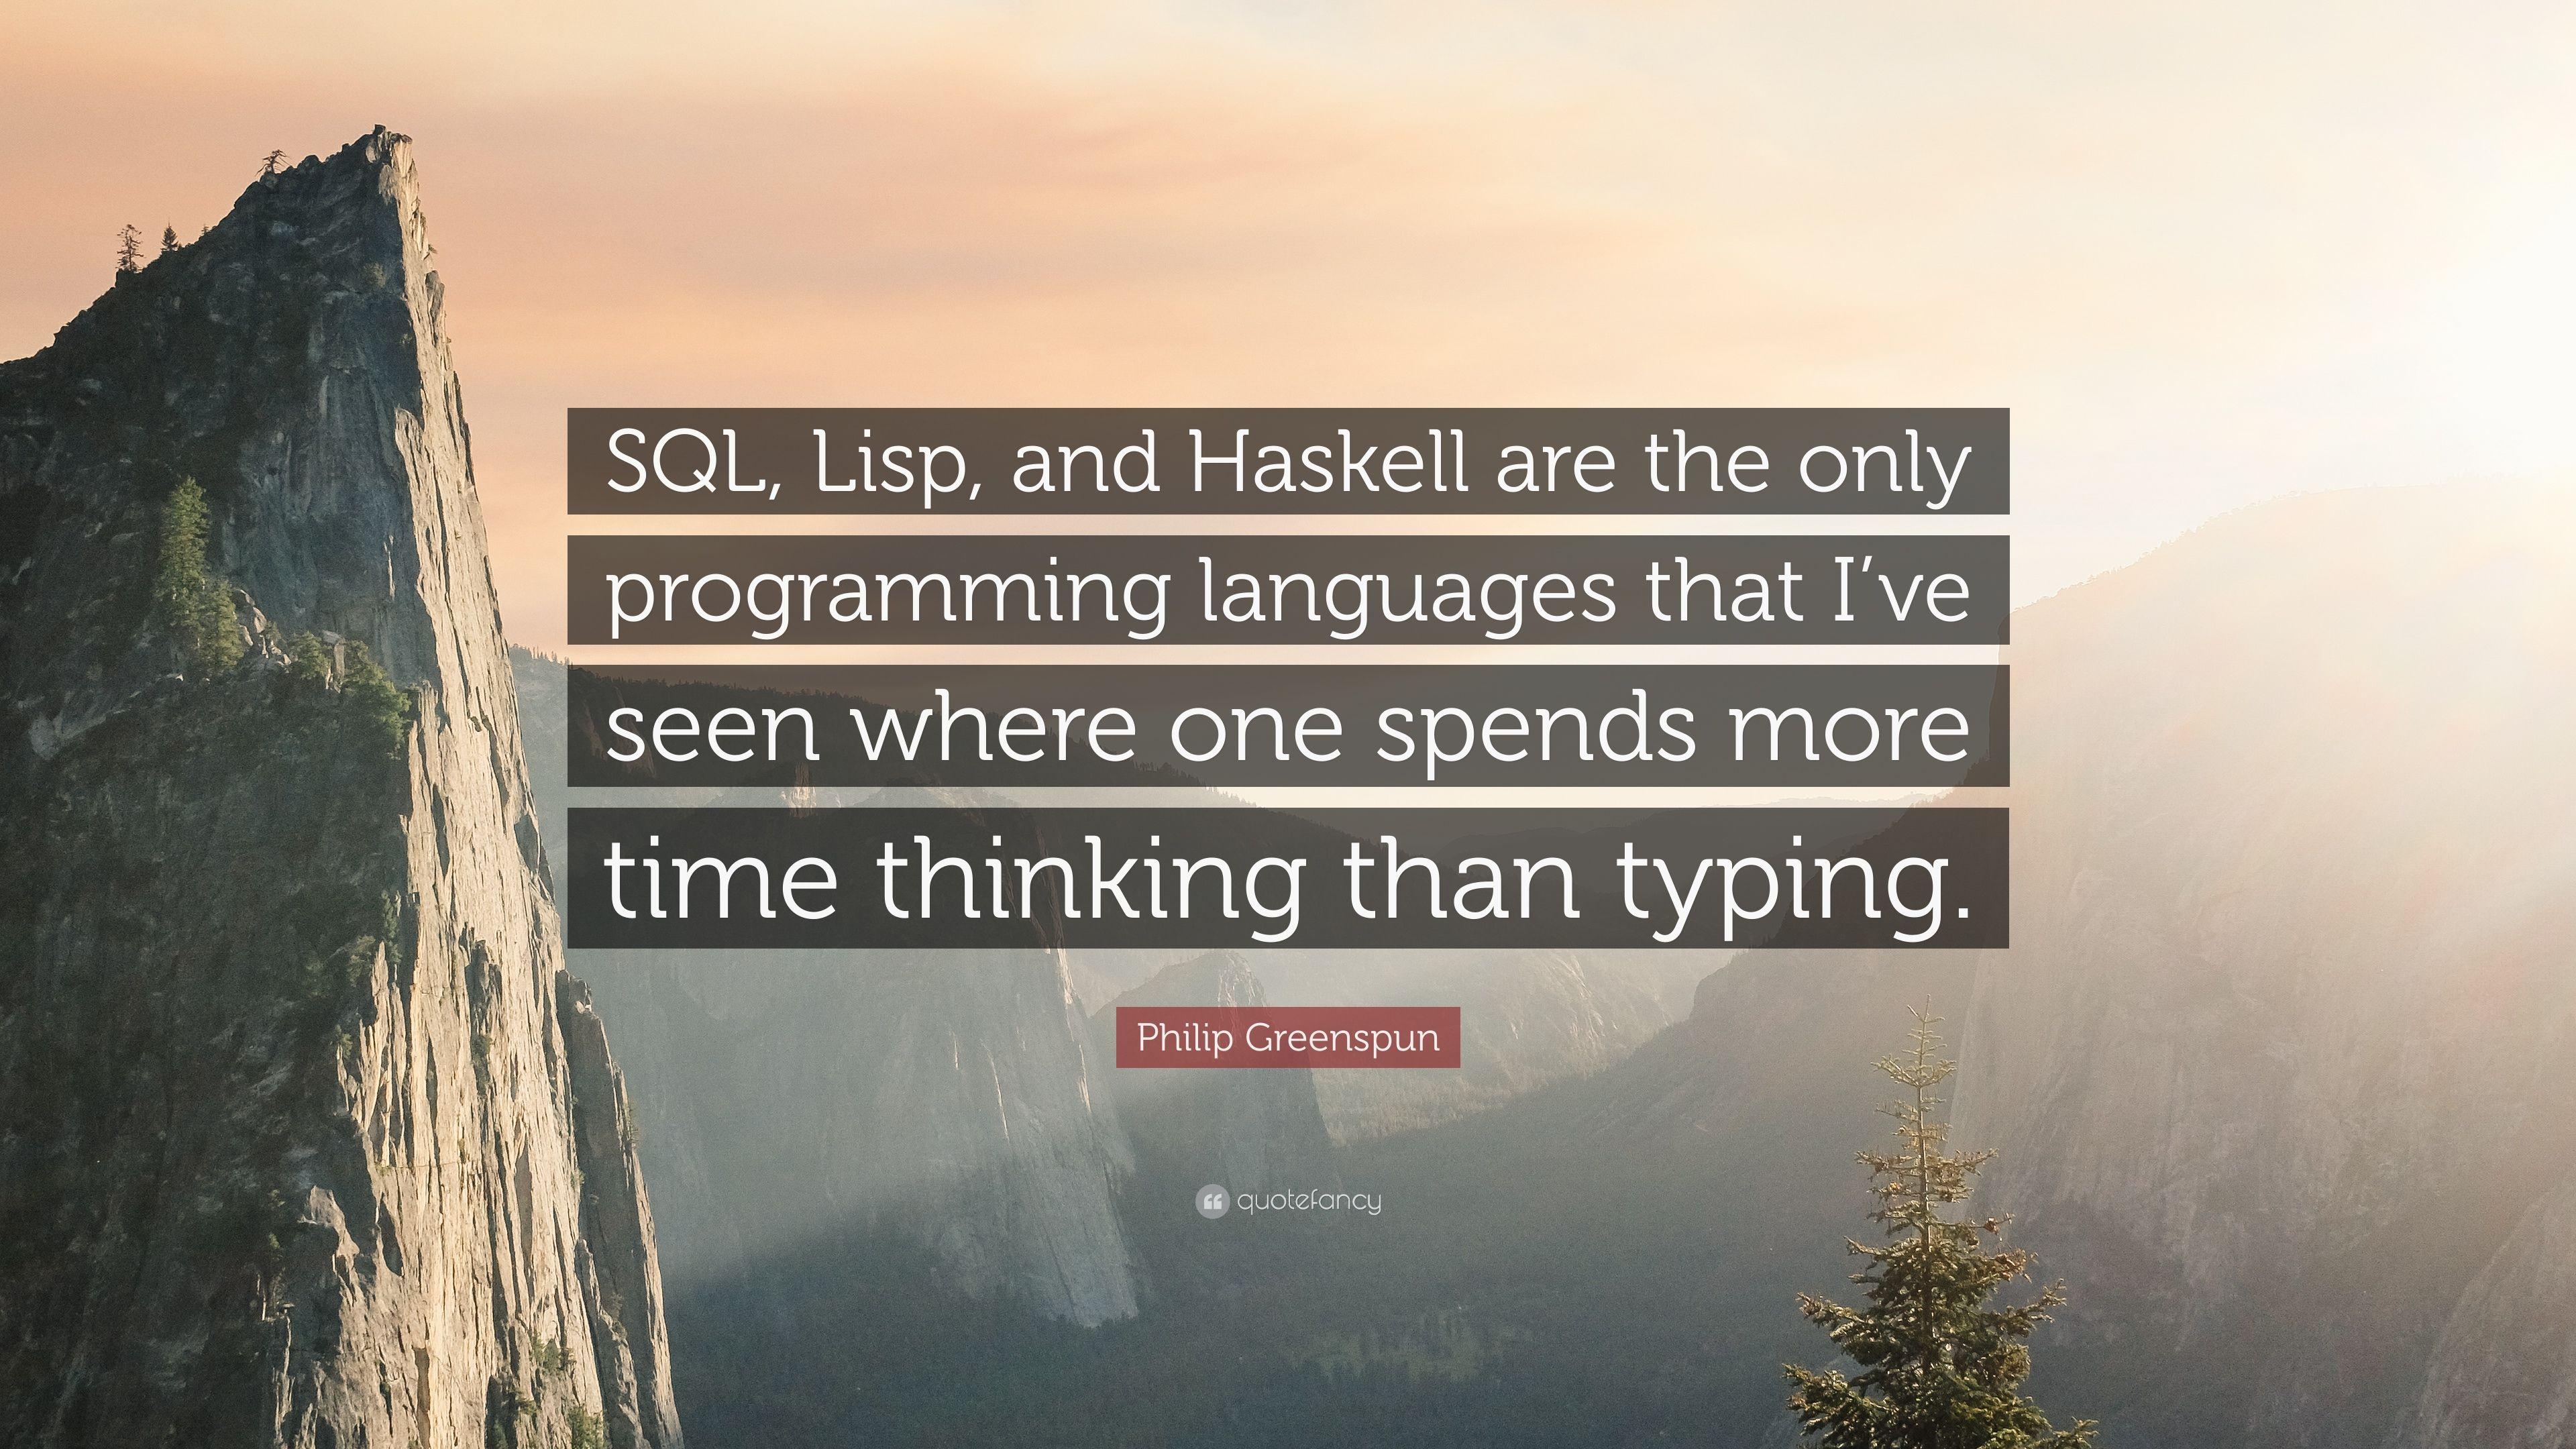 Philip Greenspun Quote: “SQL, Lisp, and Haskell are the only